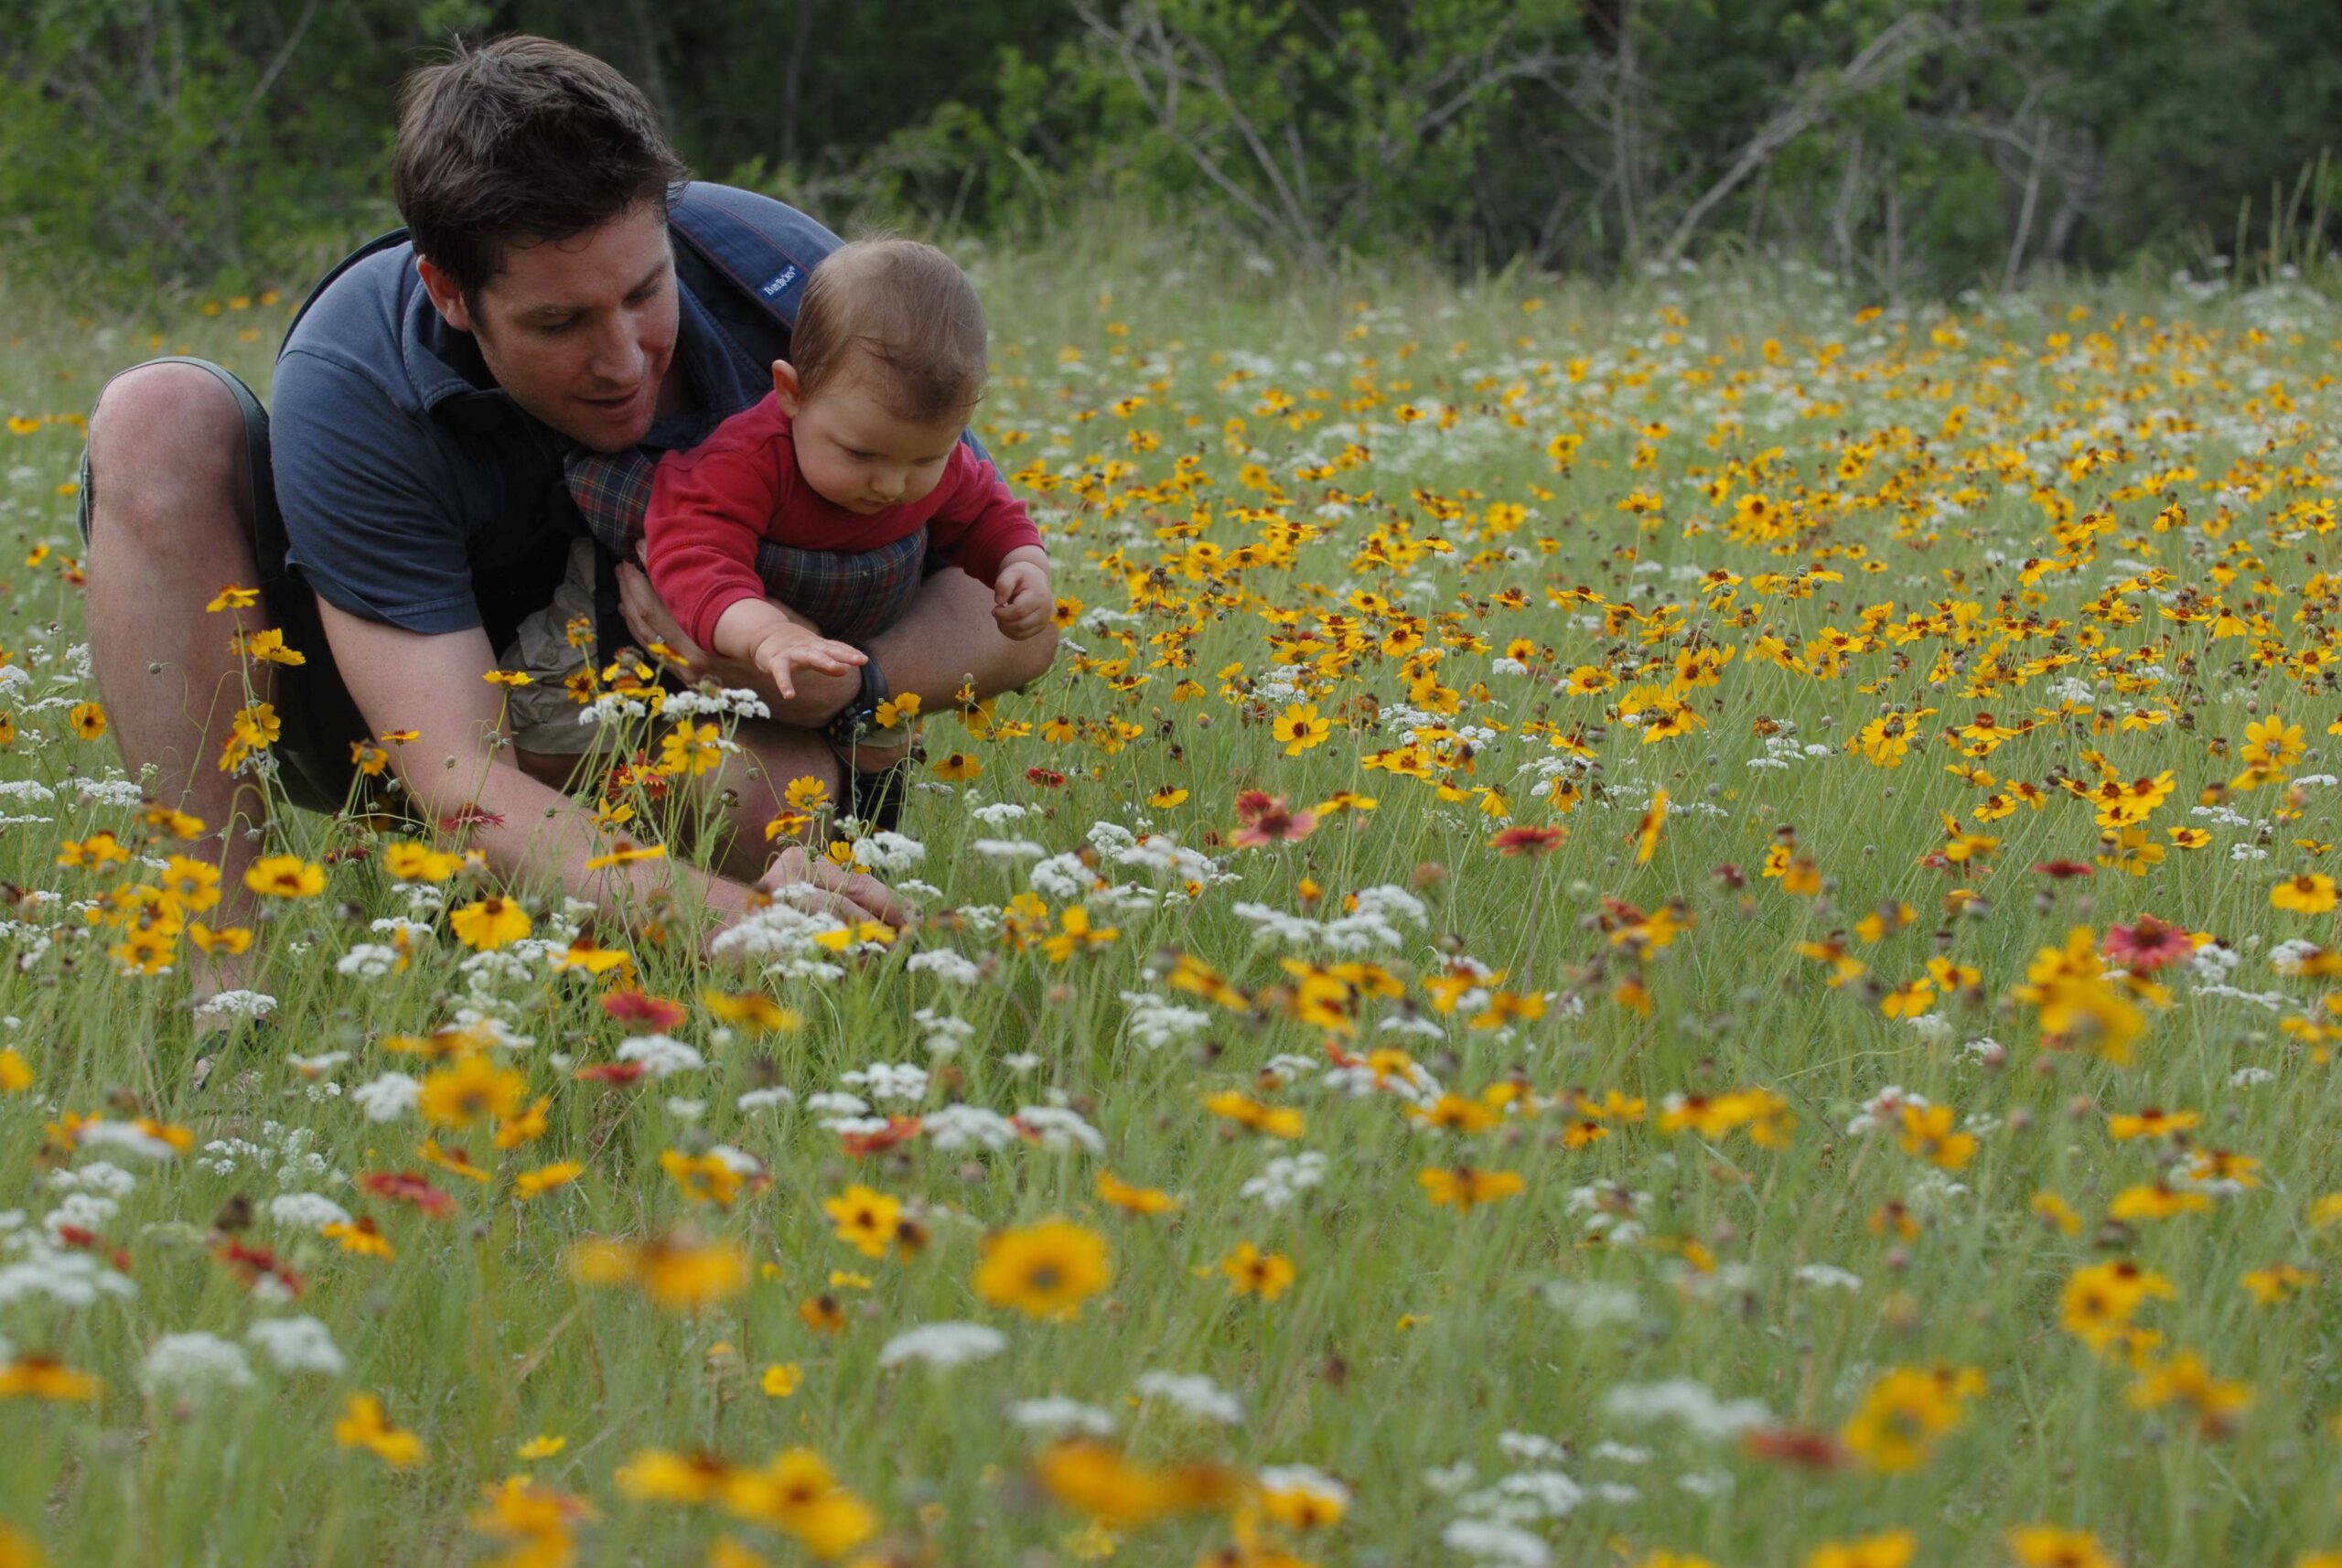 A man and a child in a field of wildflowers.